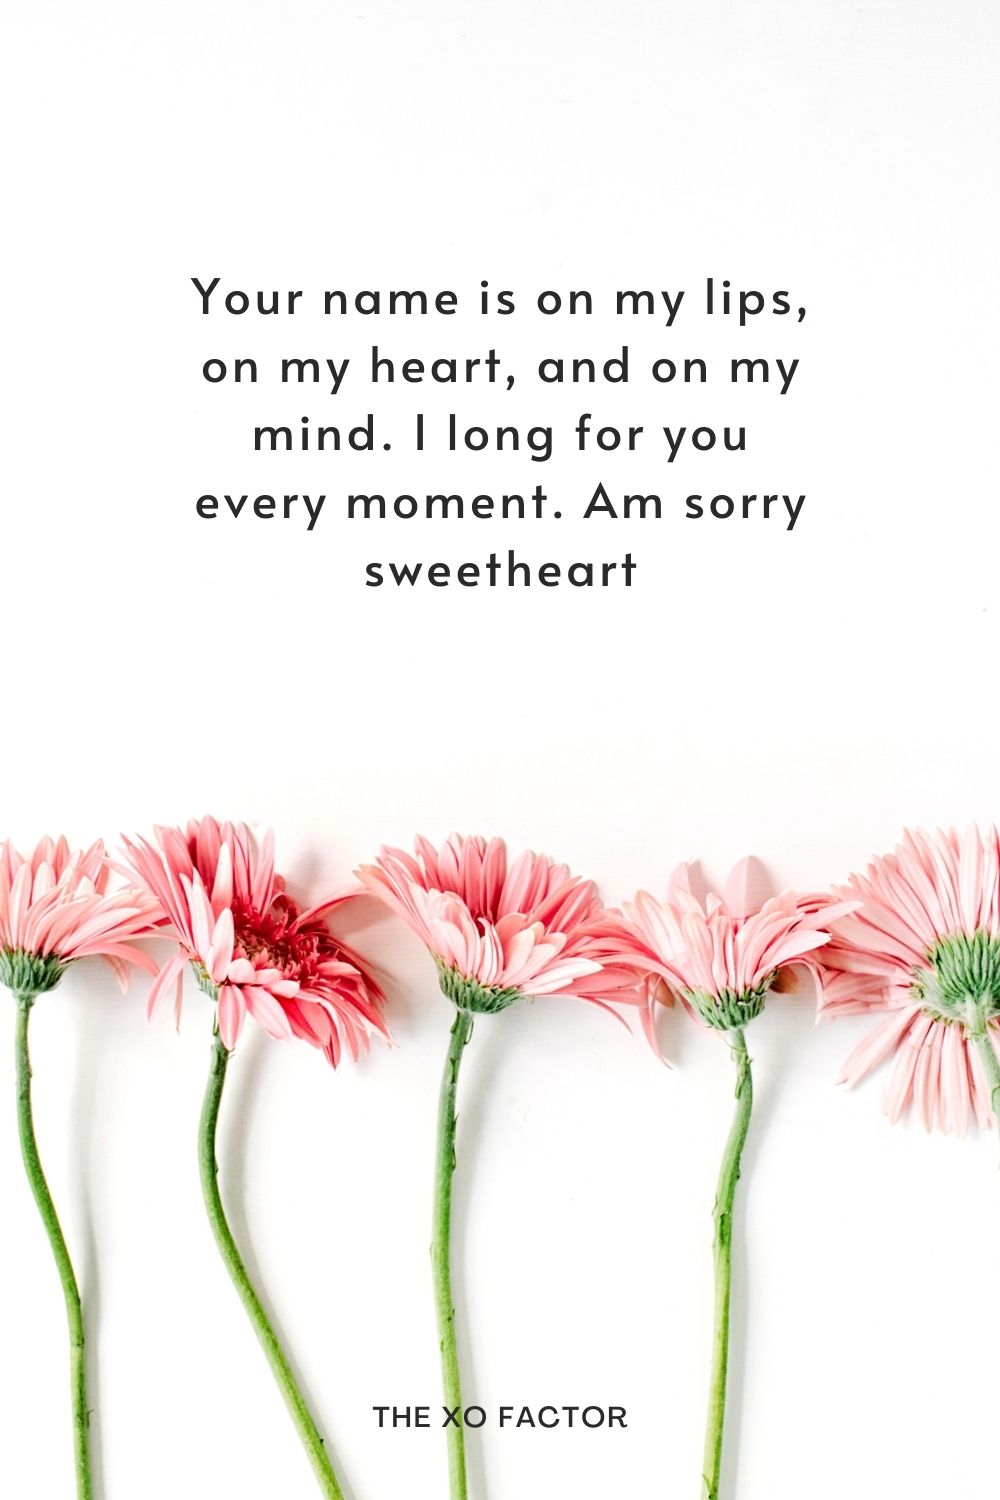 Your name is on my lips, on my heart, and on my mind. I long for you every moment.